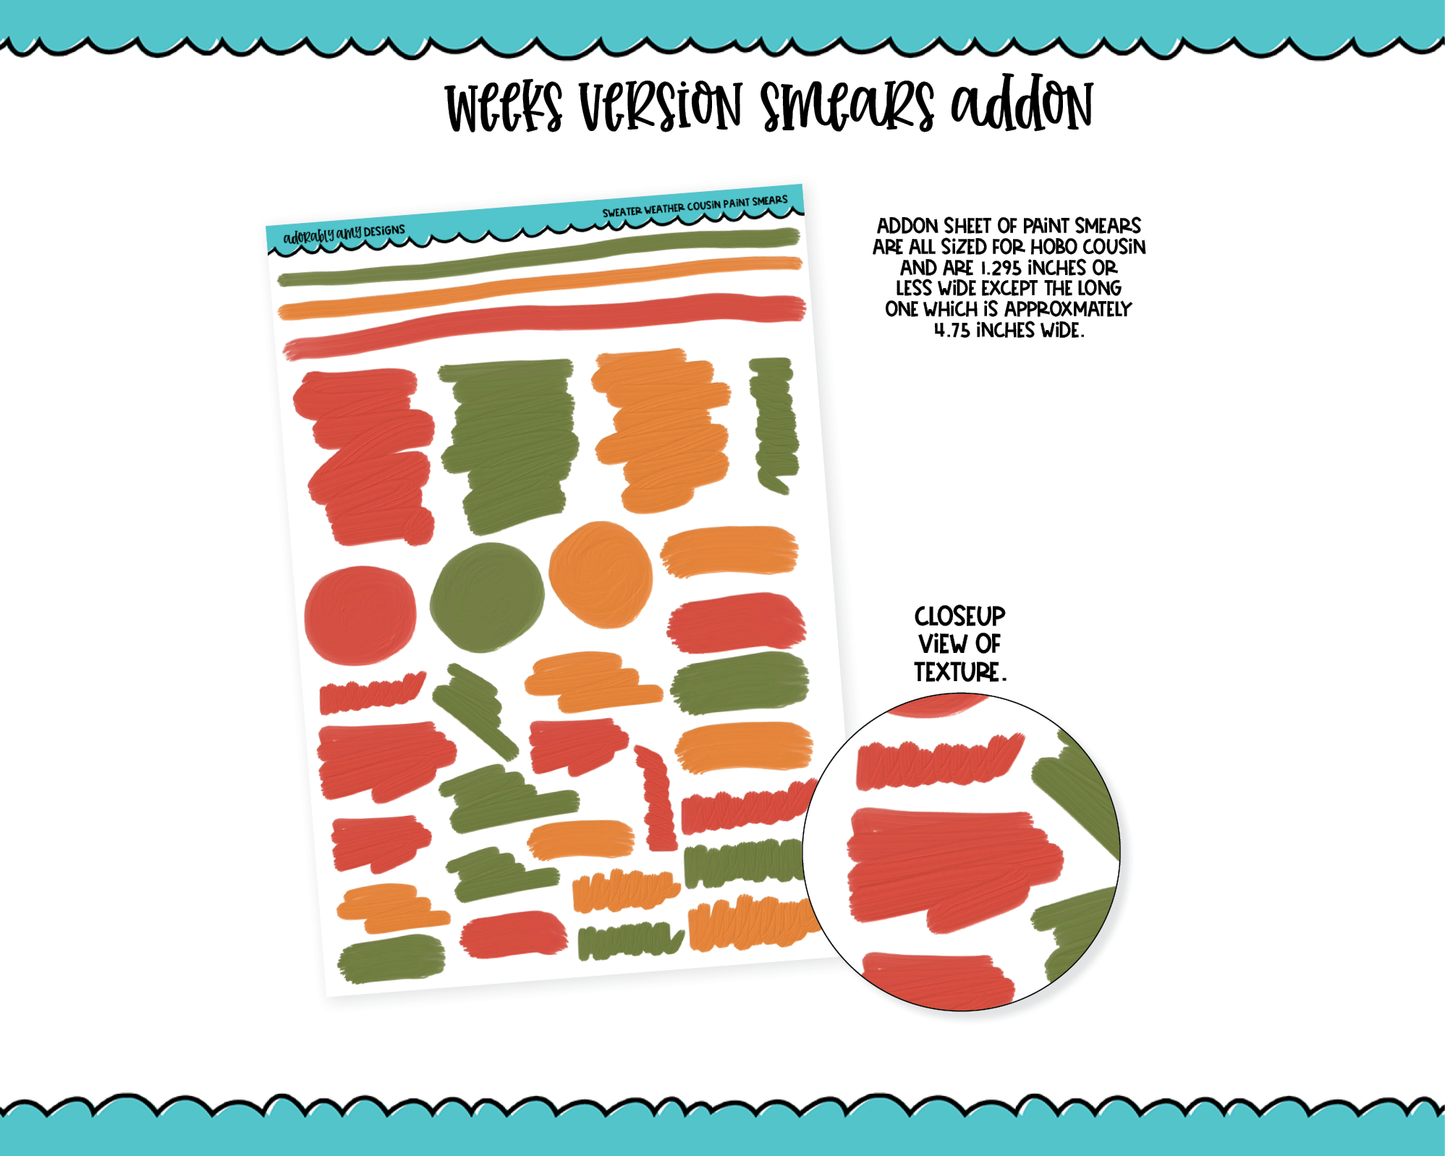 Mini B6/Weeks Sweater Weather Fall Autumn Theme Weekly Planner Sticker Kit sized for ANY Vertical Insert